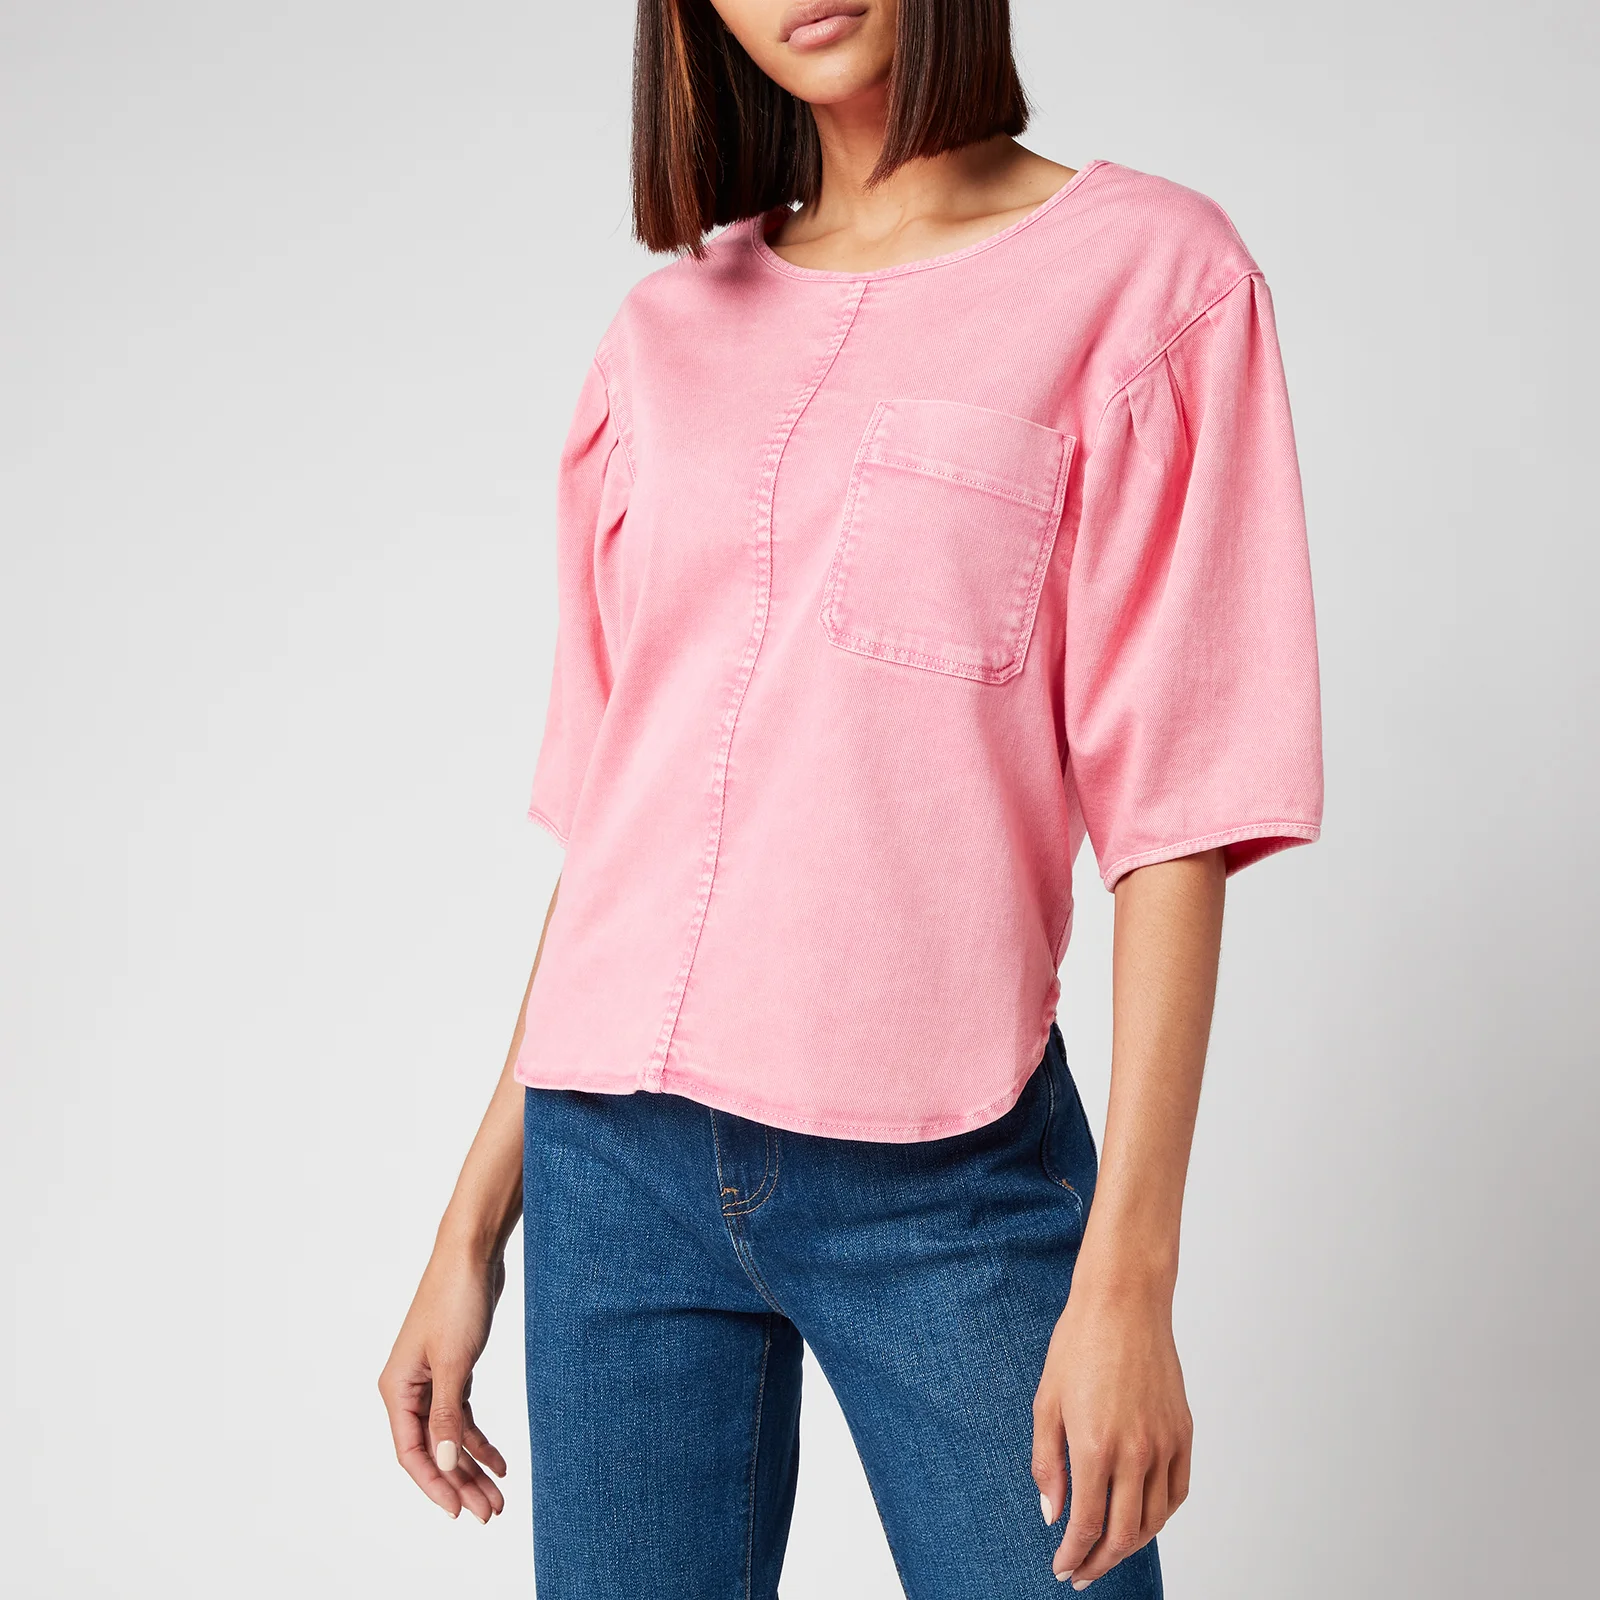 See By Chloé Women's Dyed Denim Top - Juicy Pink Image 1